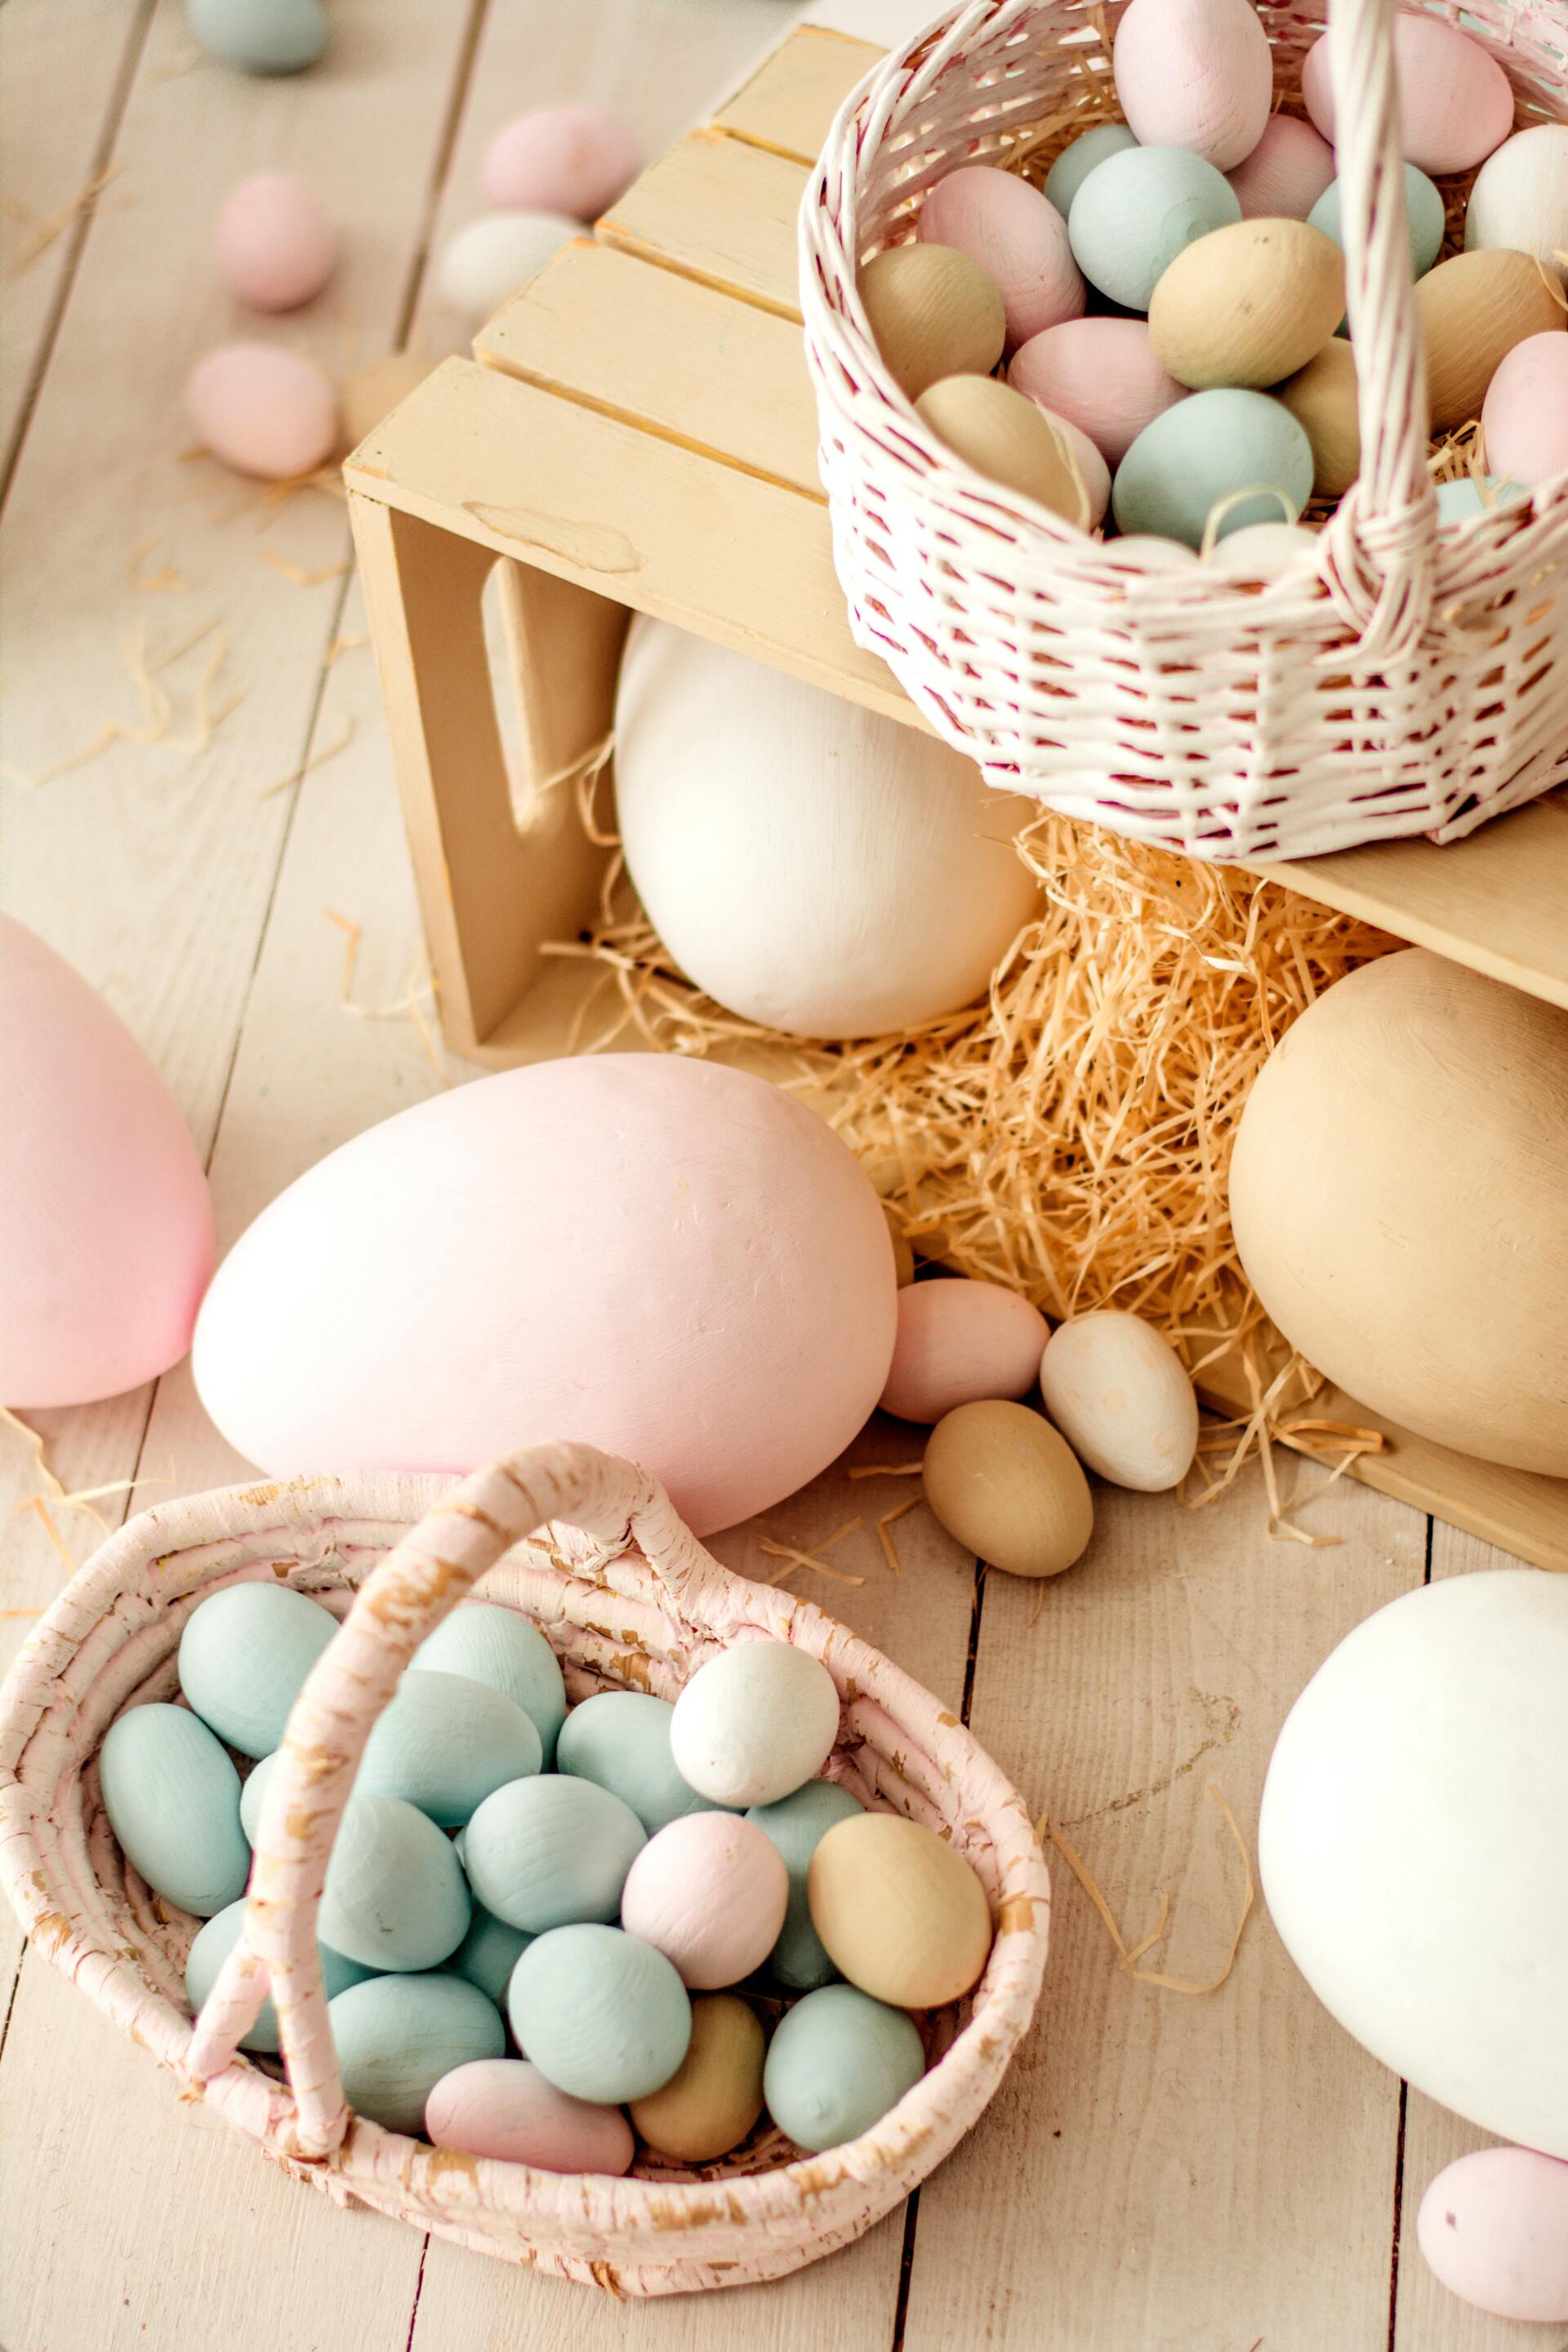 How to stay healthy over Easter